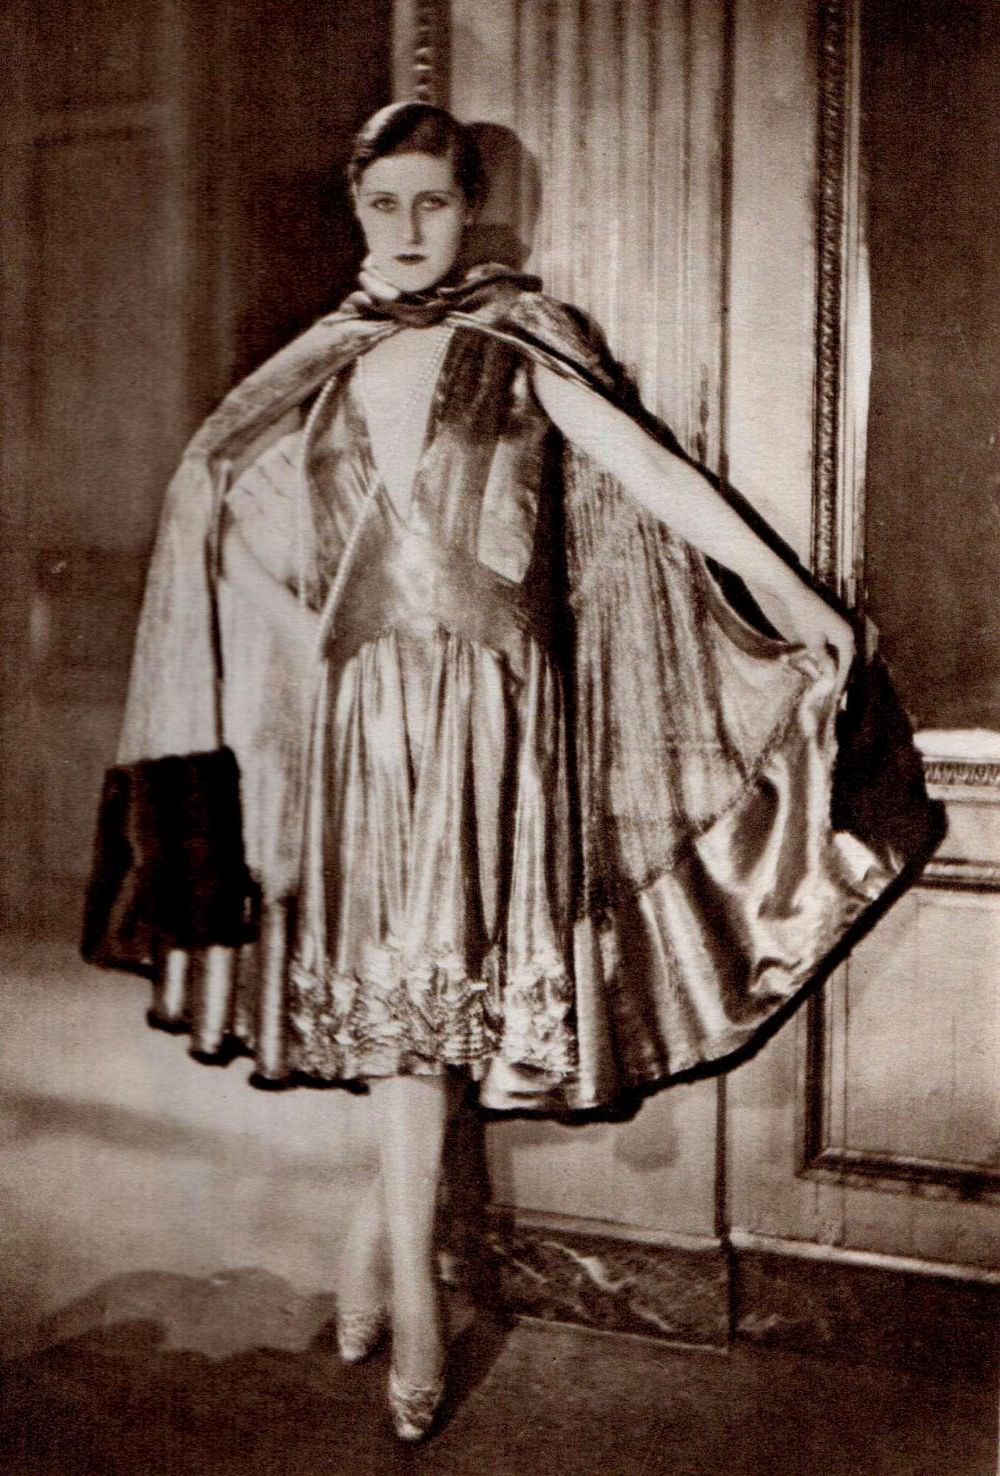 A young woman in dress during the Jazz Age in America.